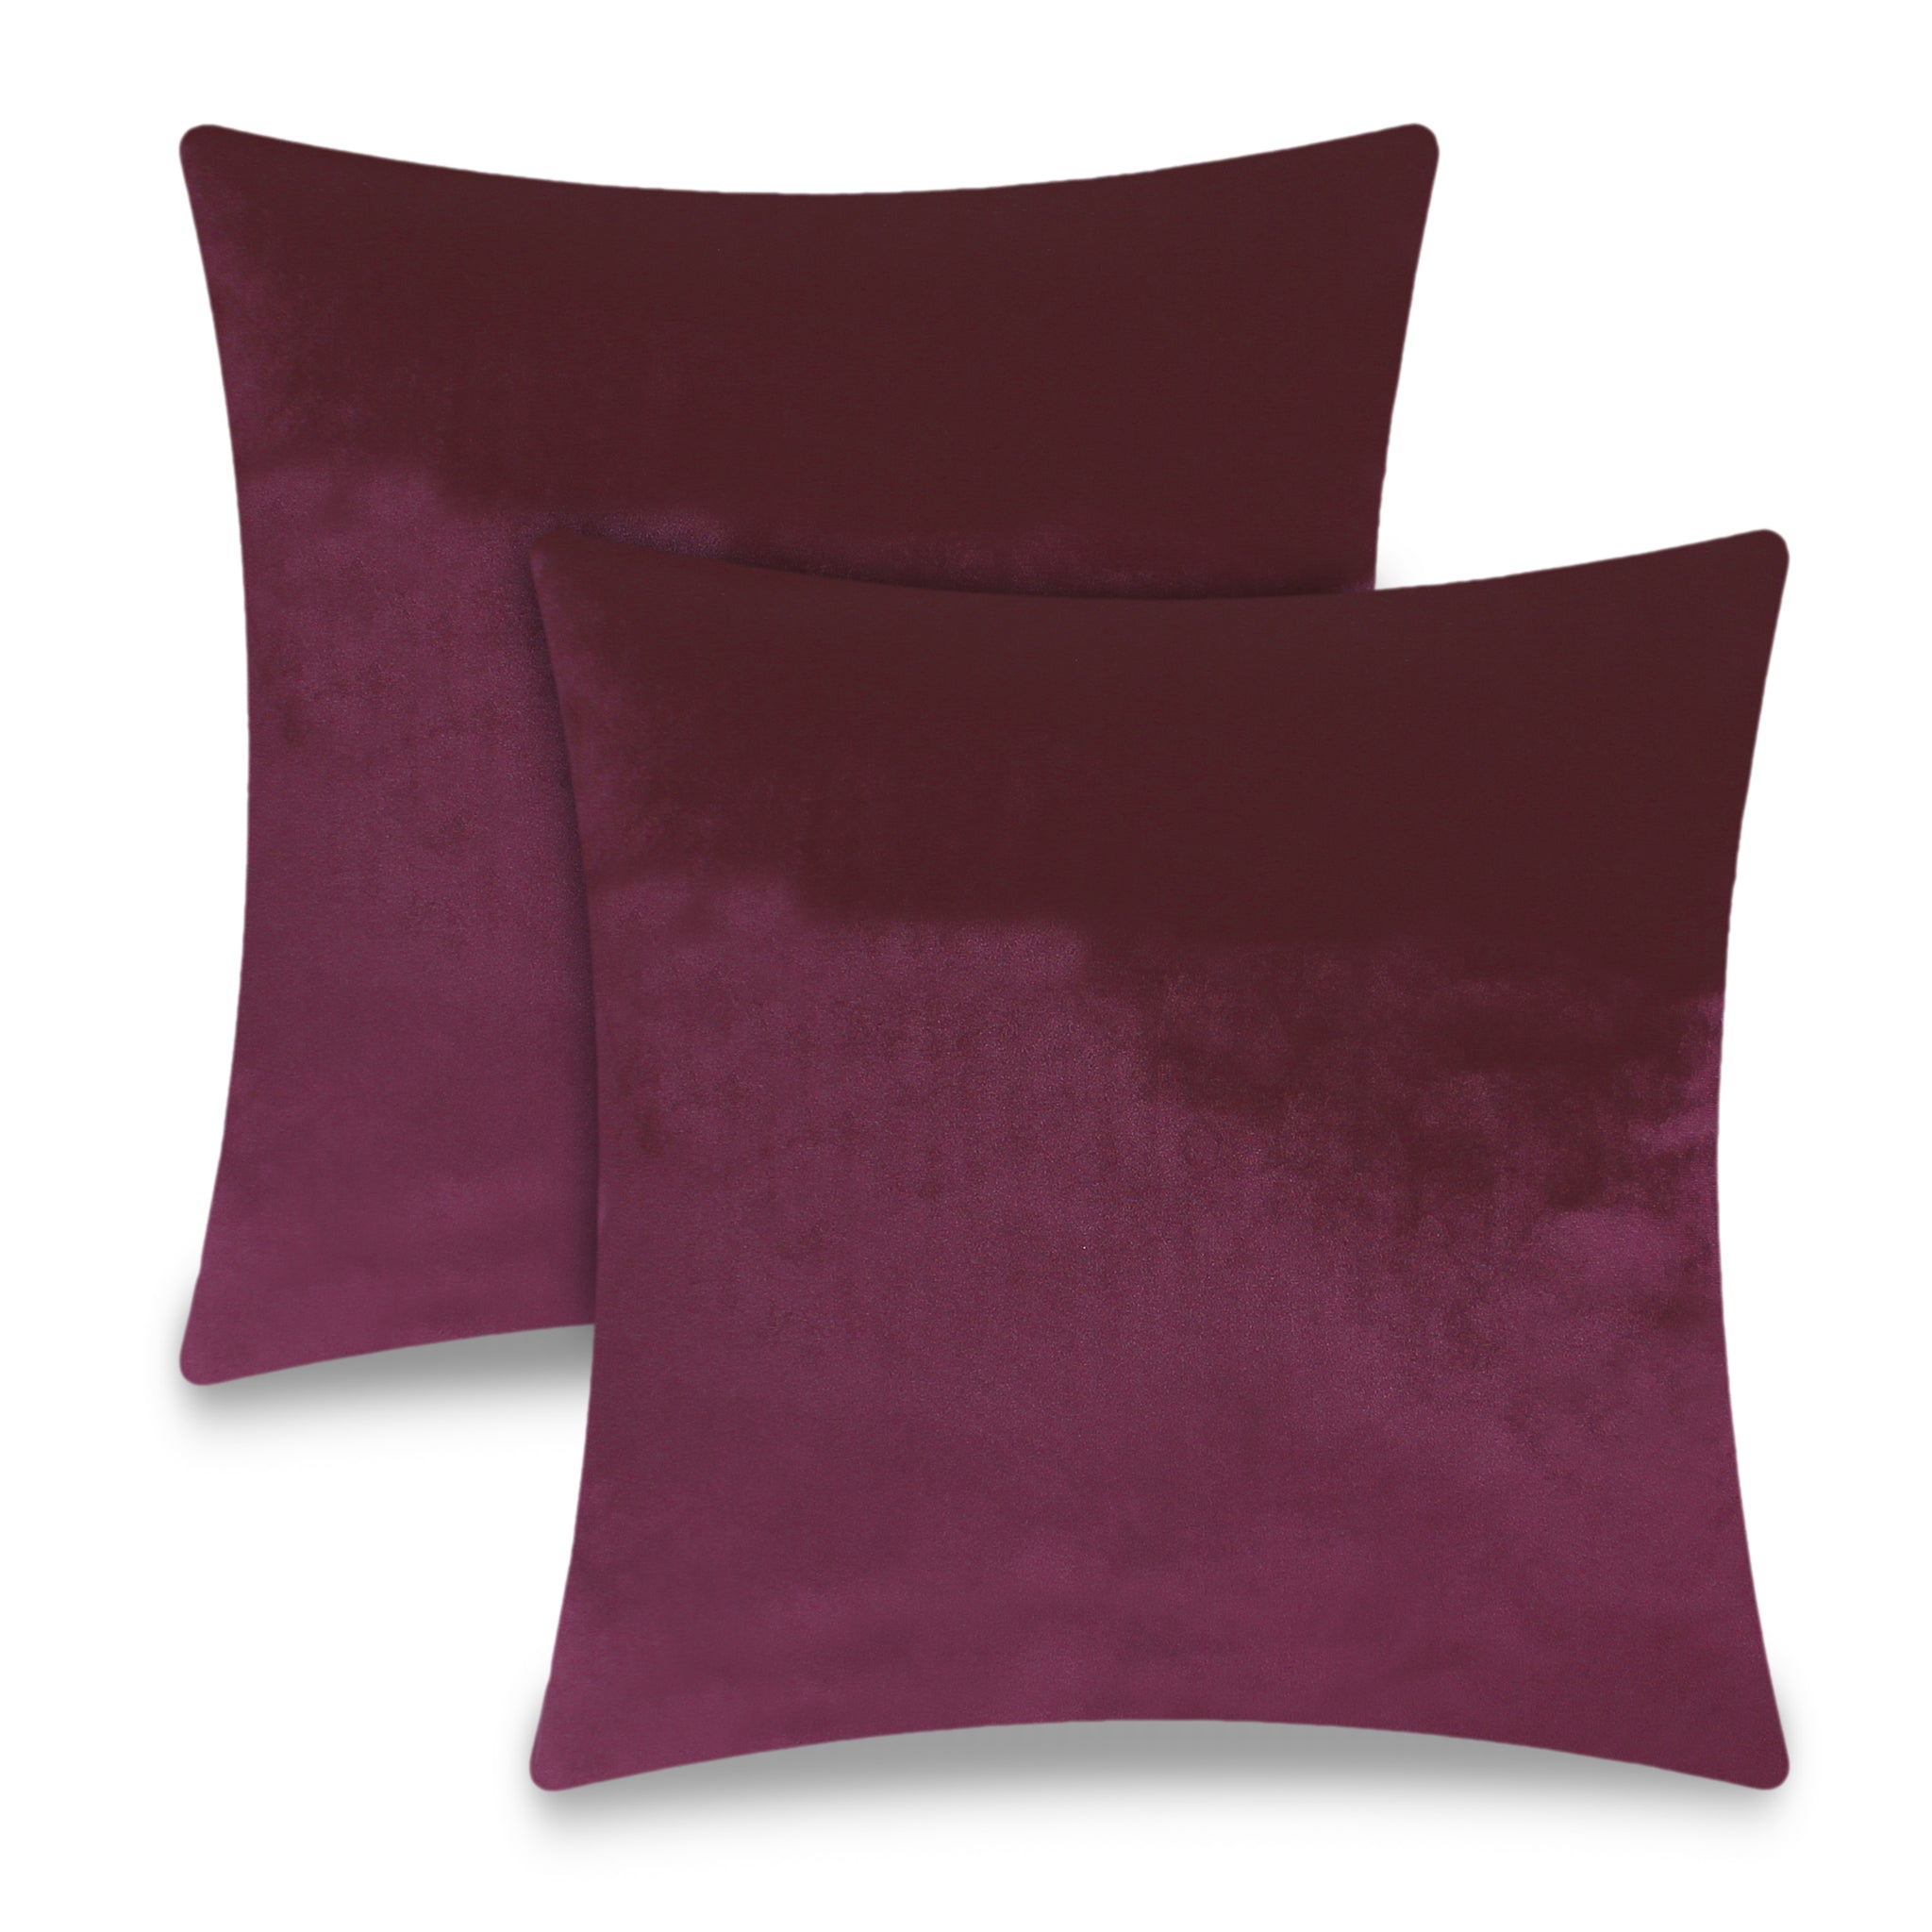 Set of 2 Velvet Throw Pillow Covers Solid Color Decorative Pillow Covers Home Decor Cushion Cover for Sofa Couch Chair Bed 45x45 cm 18x18 In